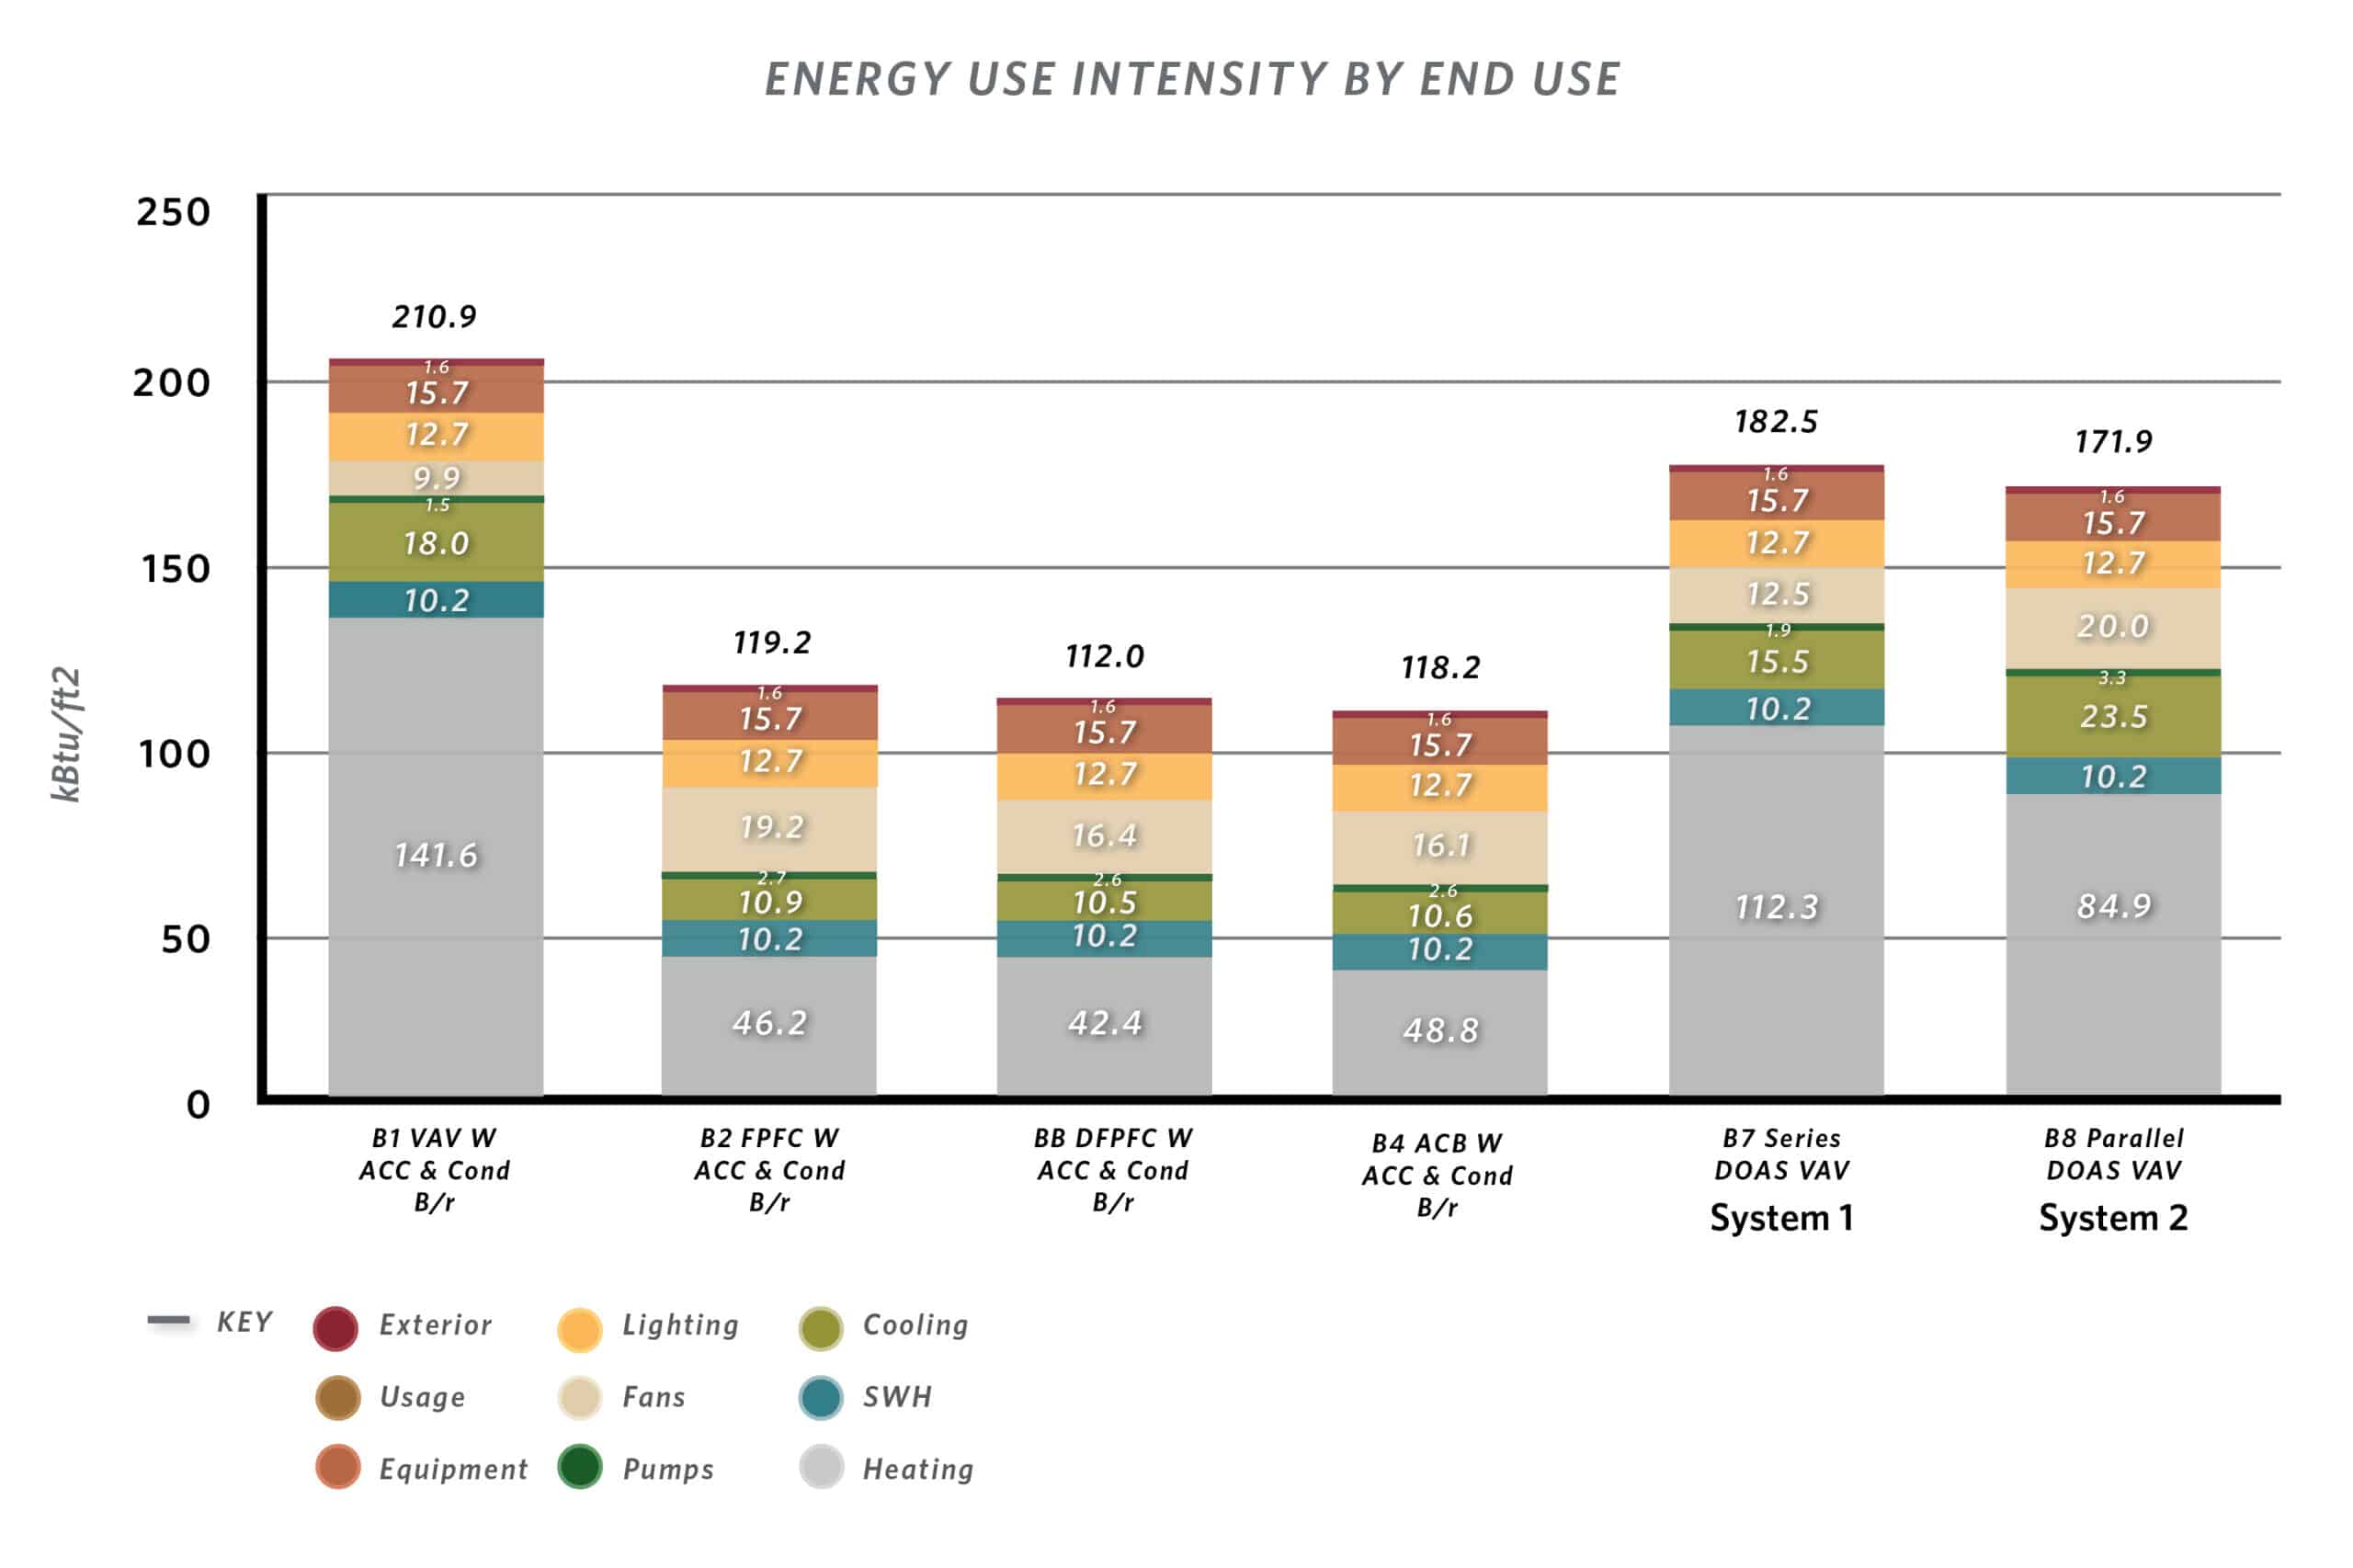 A bar chart showing Energy Use Intensity by End Use